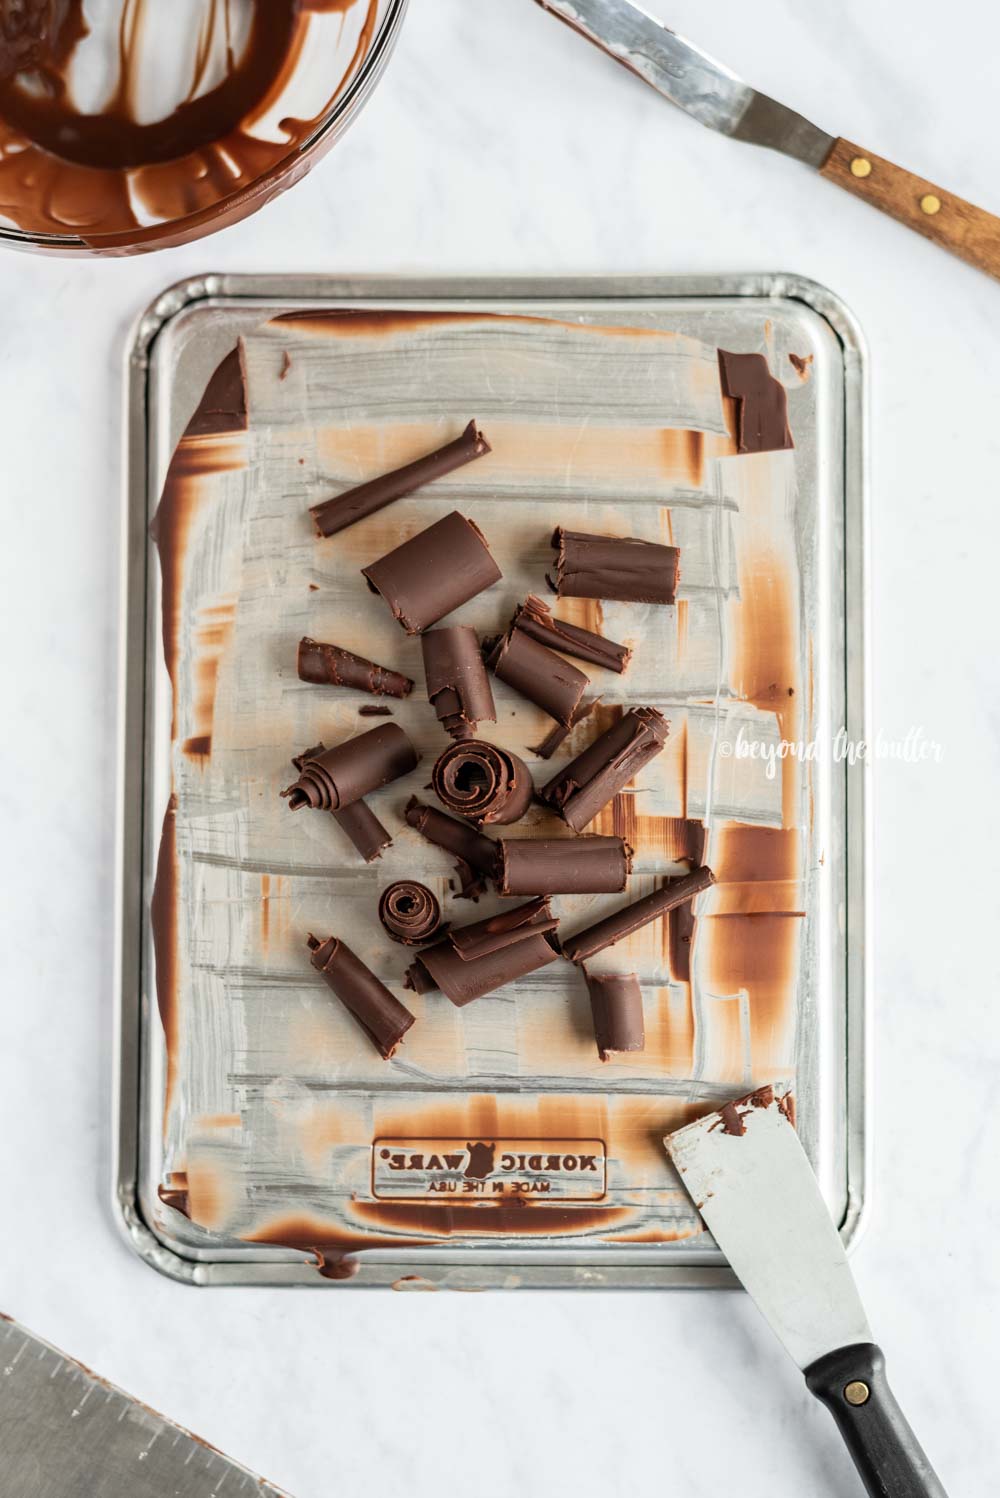 How to Make Chocolate Curls | All Images and Video © Beyond the Butter, LLC